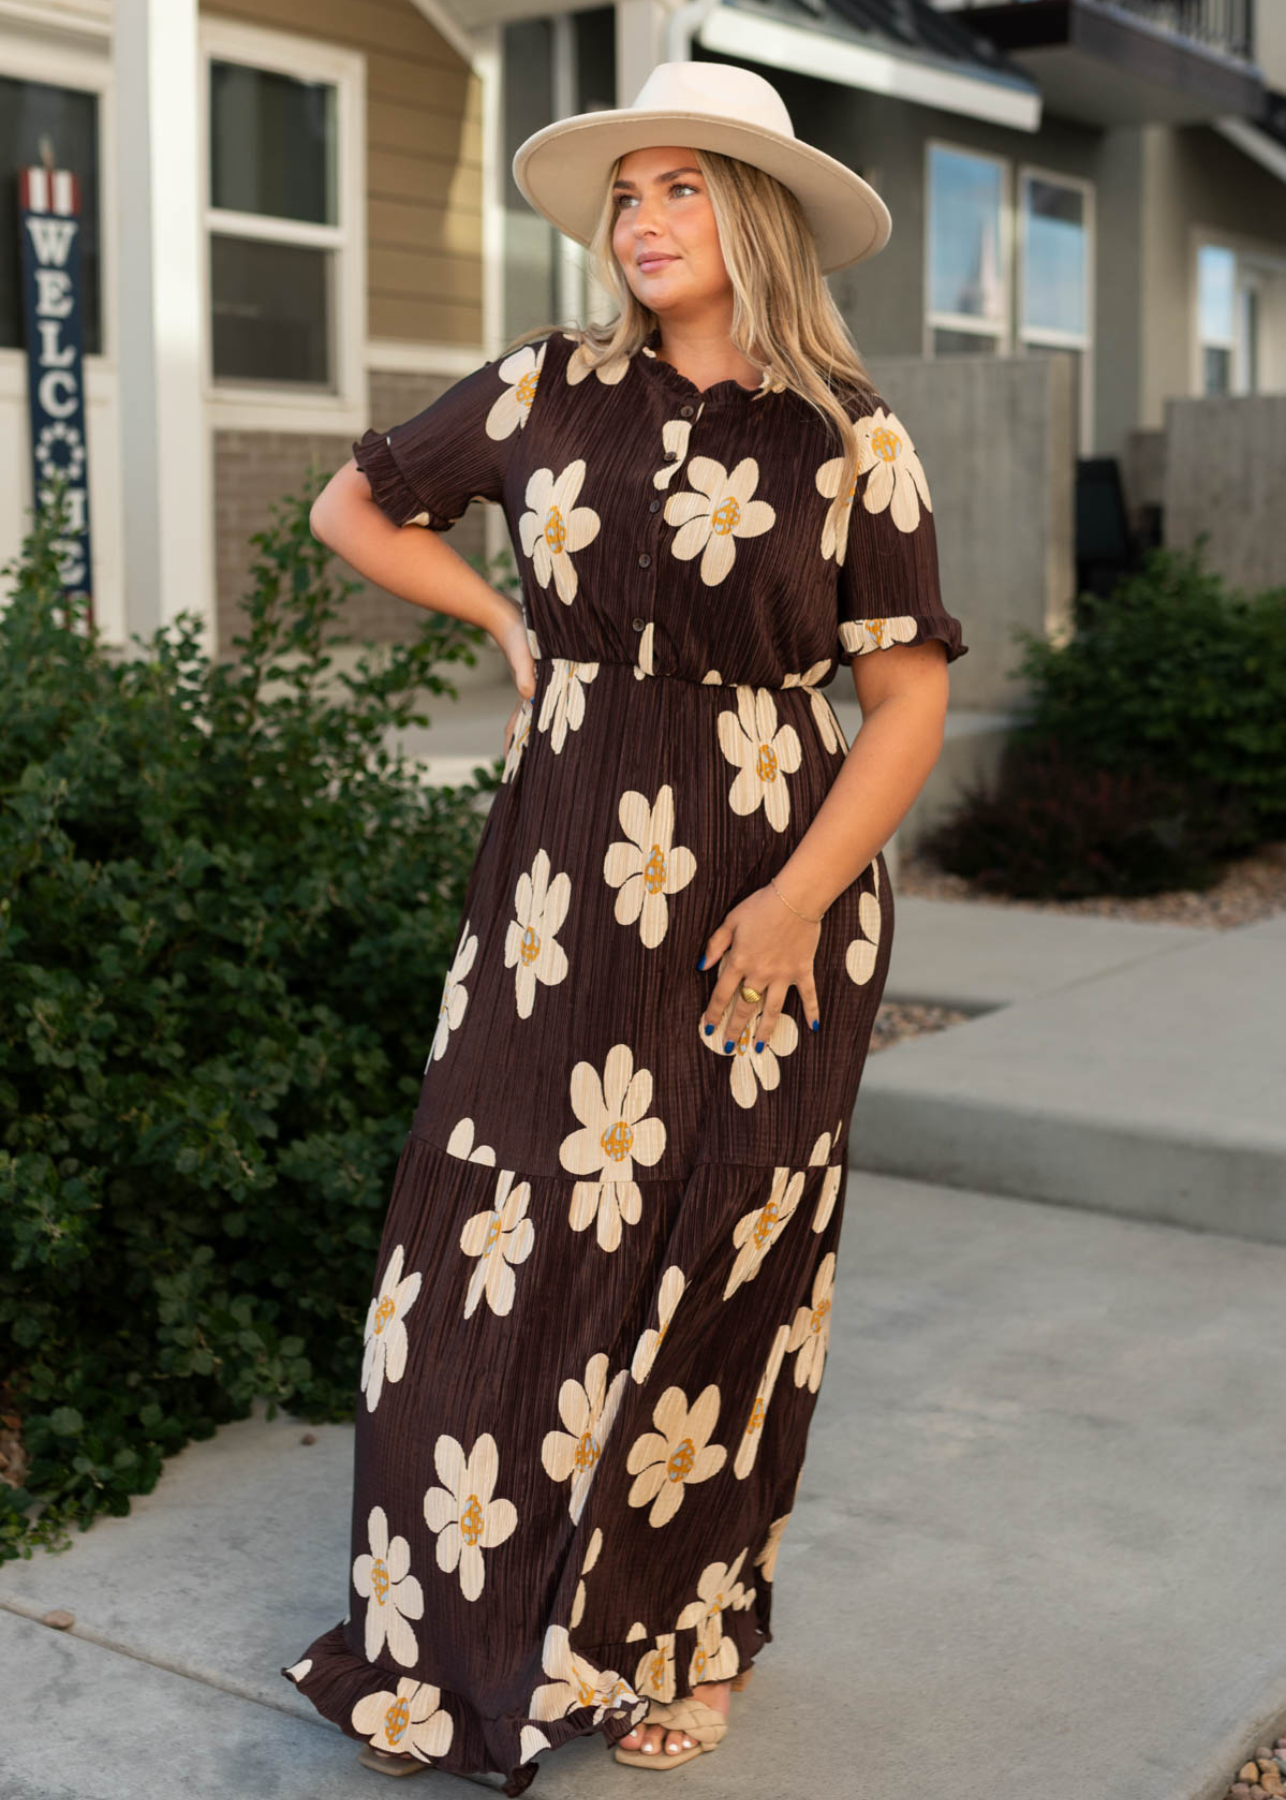 Long short sleeve brown floral dress with cream daisies